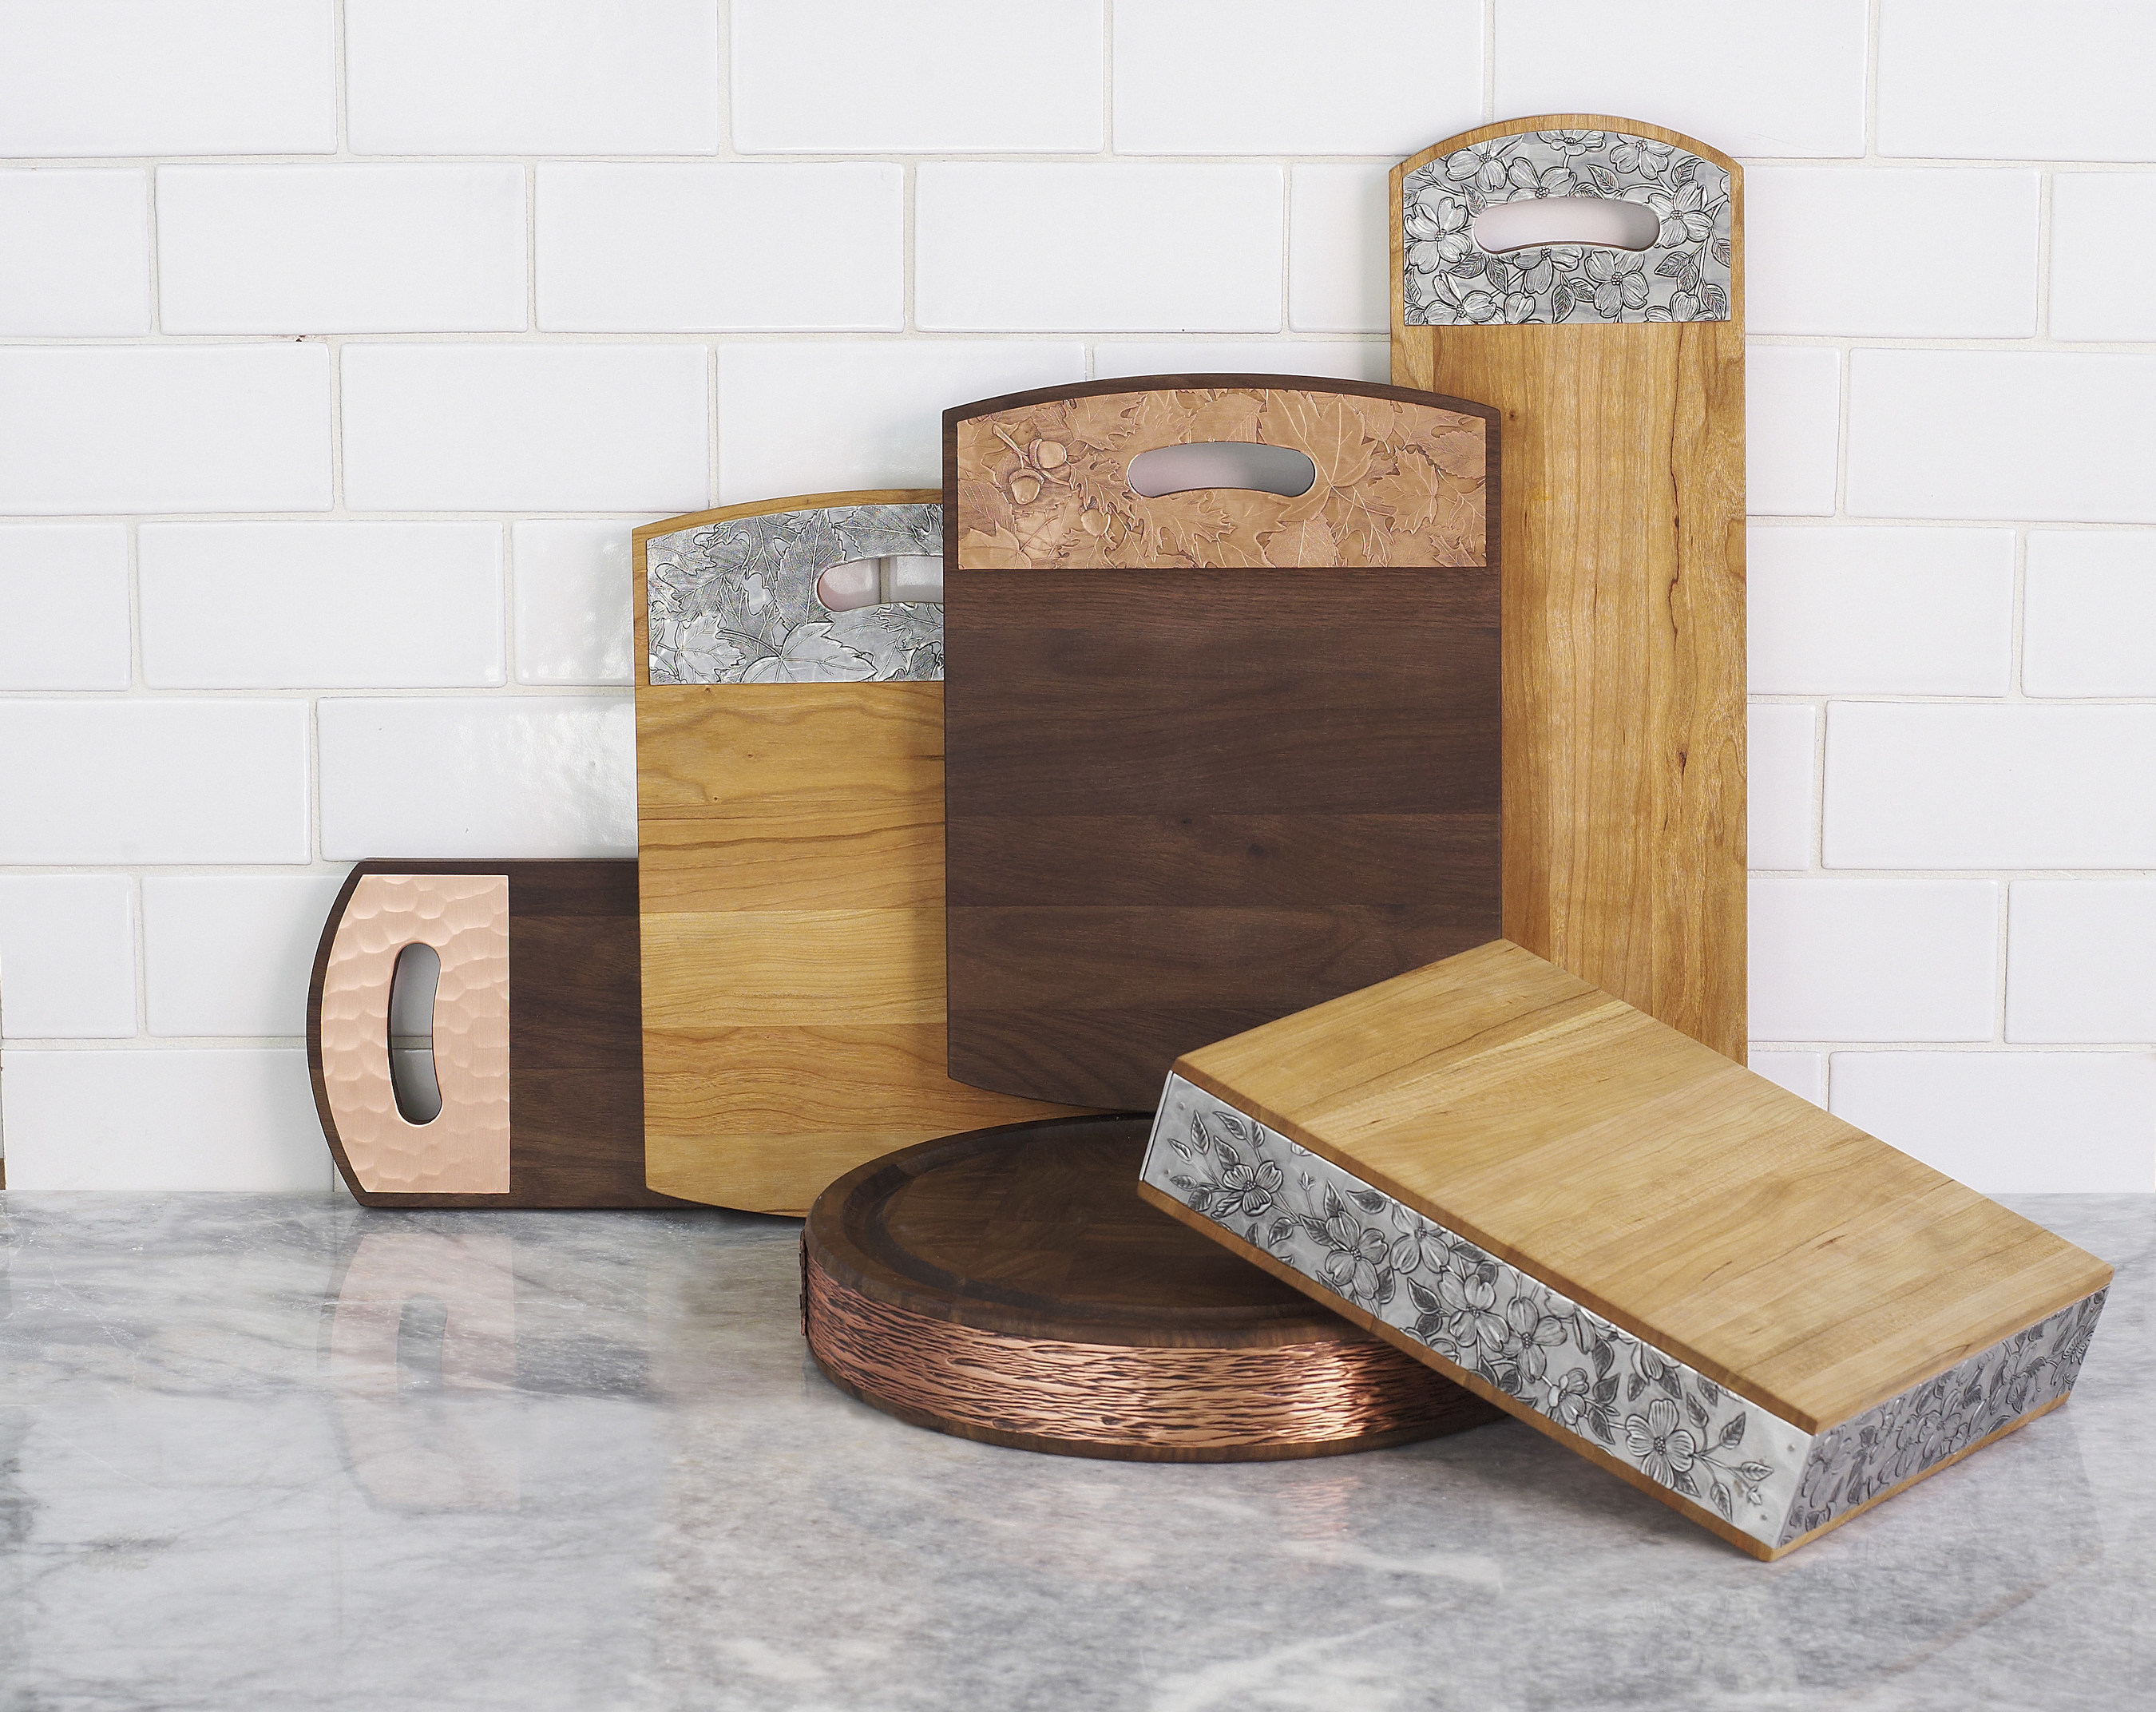 Wendell August and Warther Cutlery present a new collection of cutting boards combining meticulous woodworking with hand hammered metal. The result is a board that is both beautiful and functional.